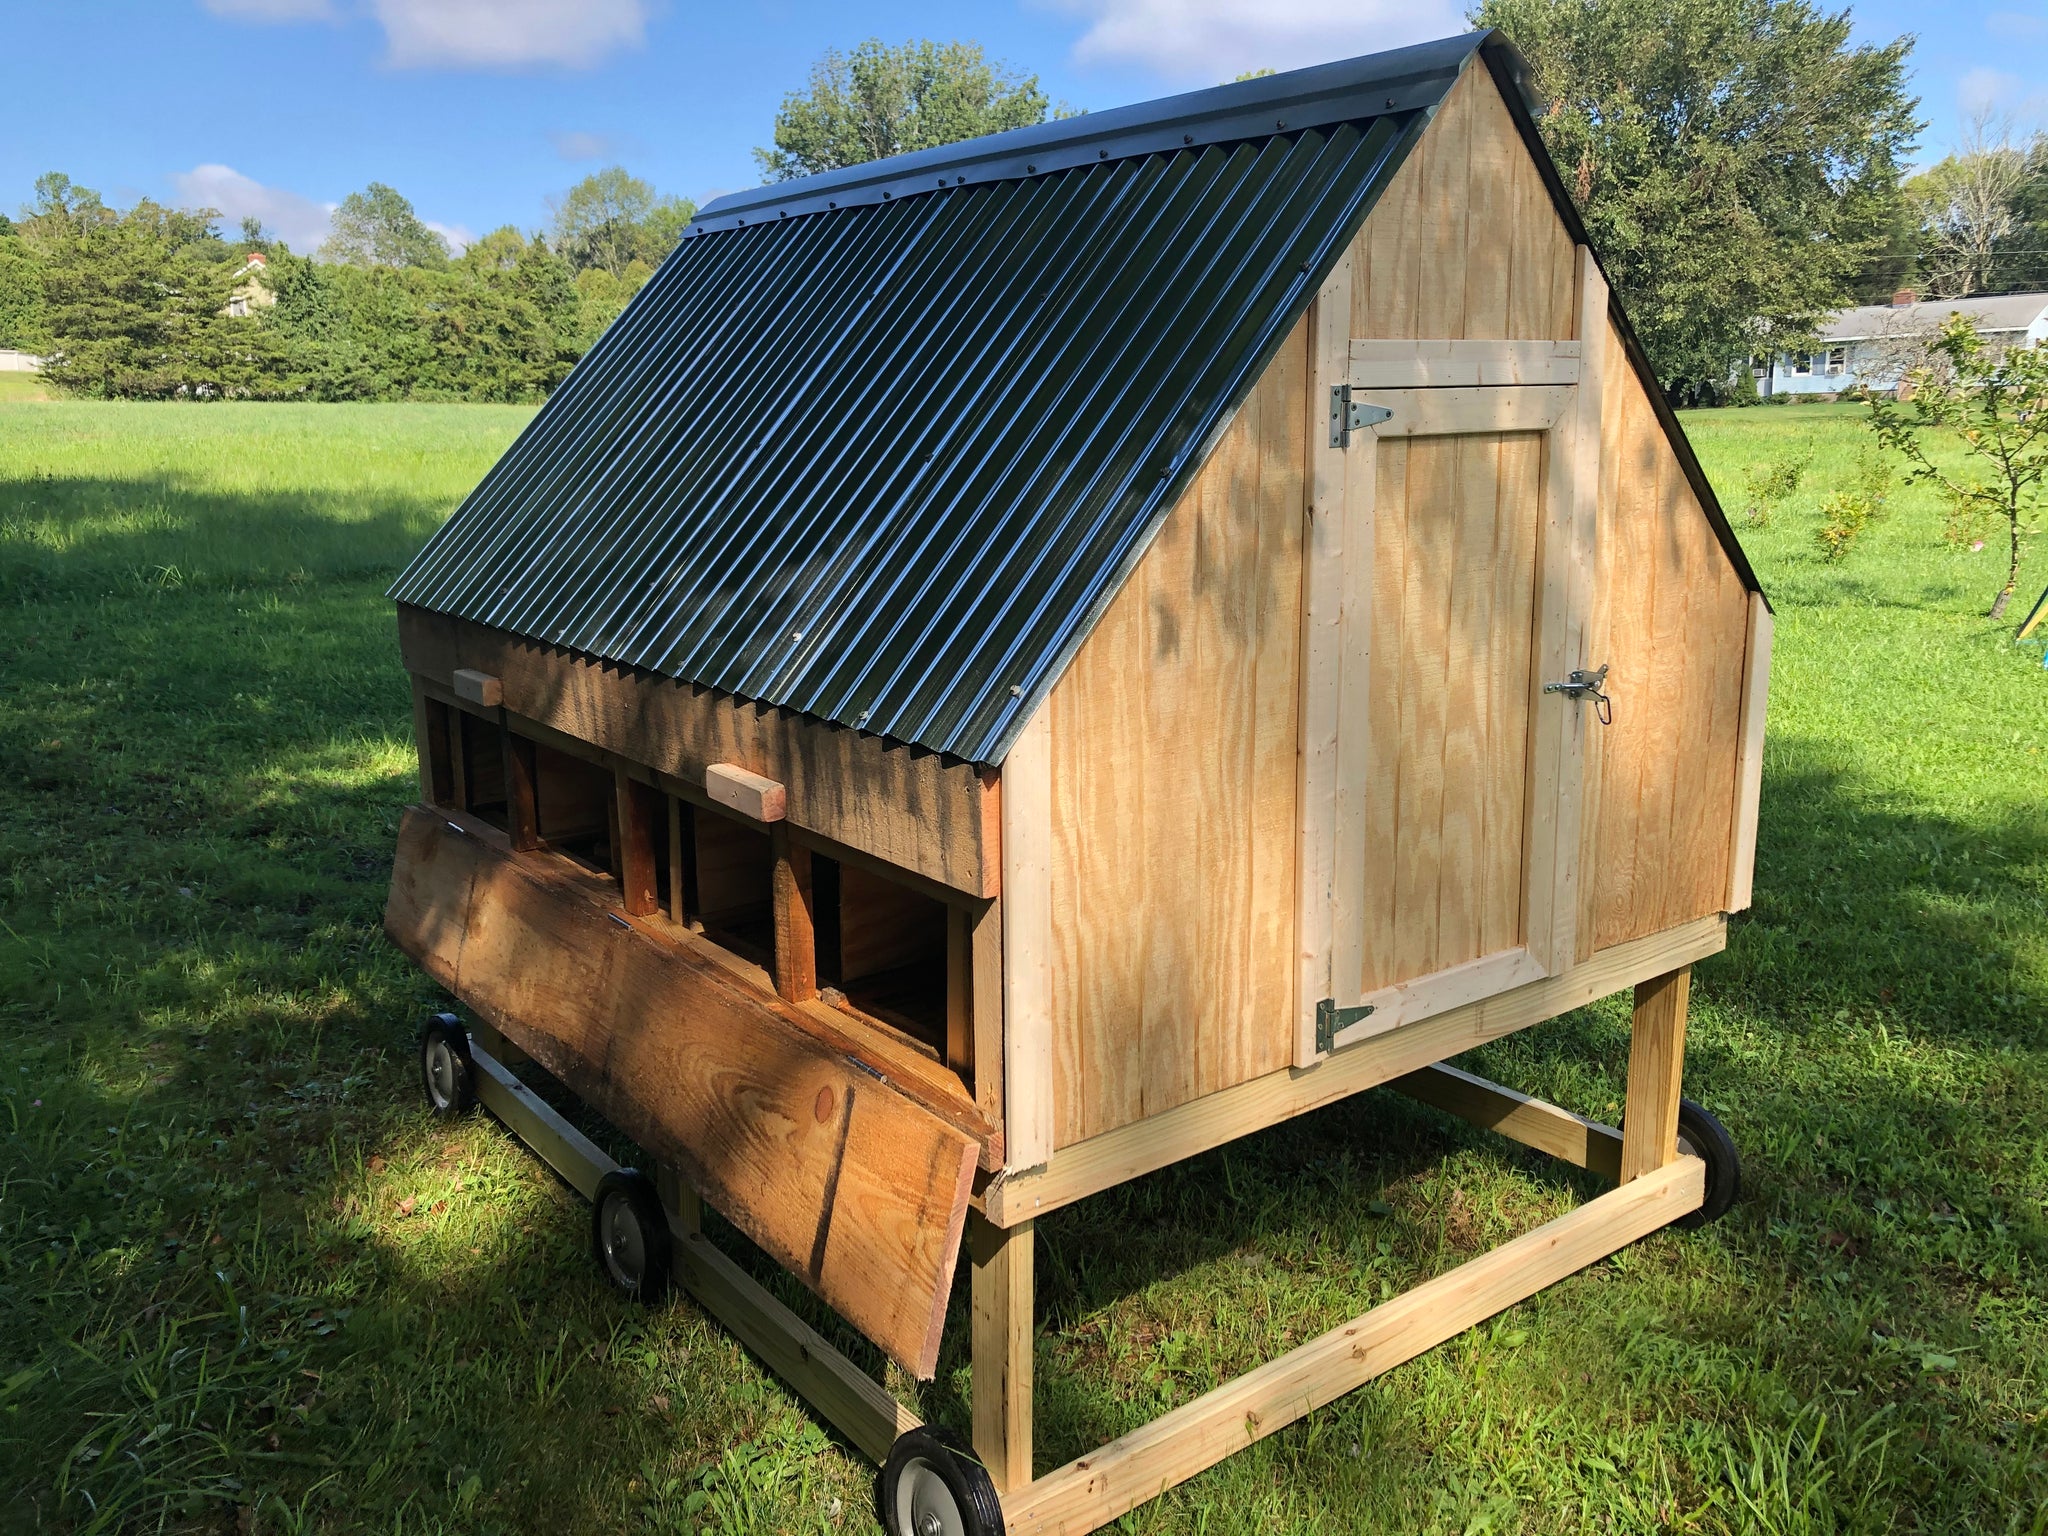 The Double Cape - Chicken Coop for 12+ hens